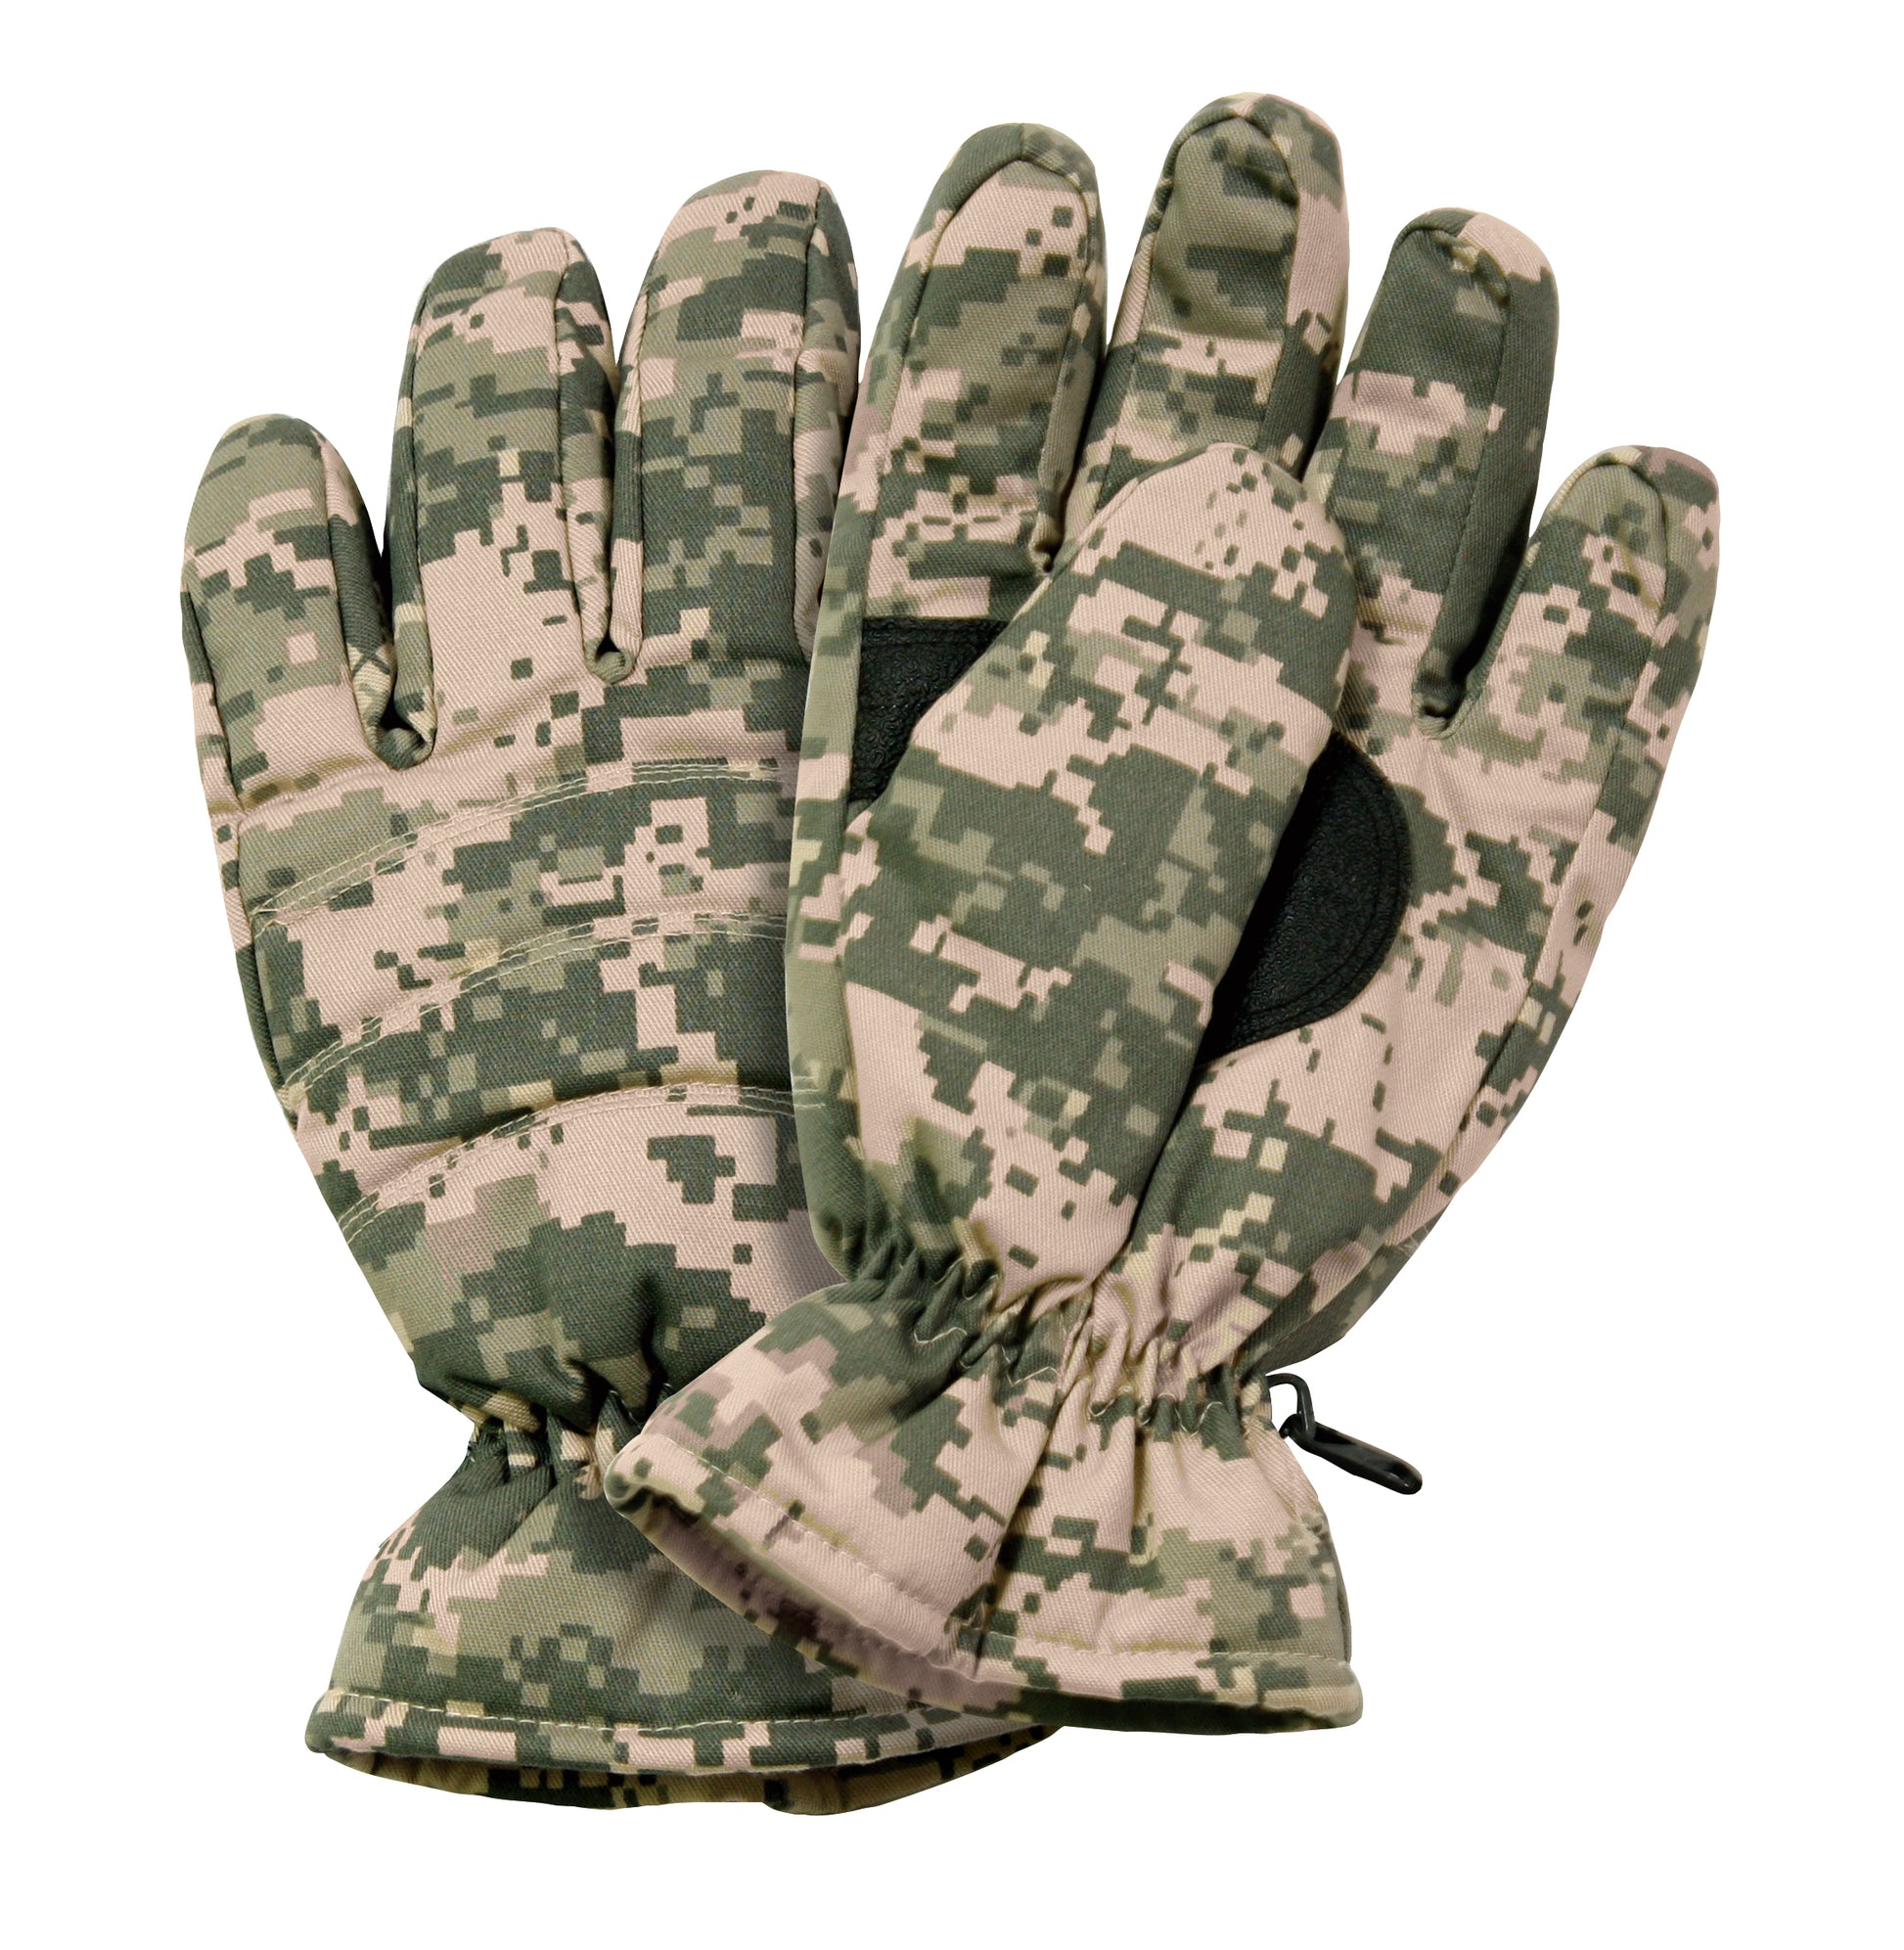 Insulated Hunting Gloves - Tactical Choice Plus